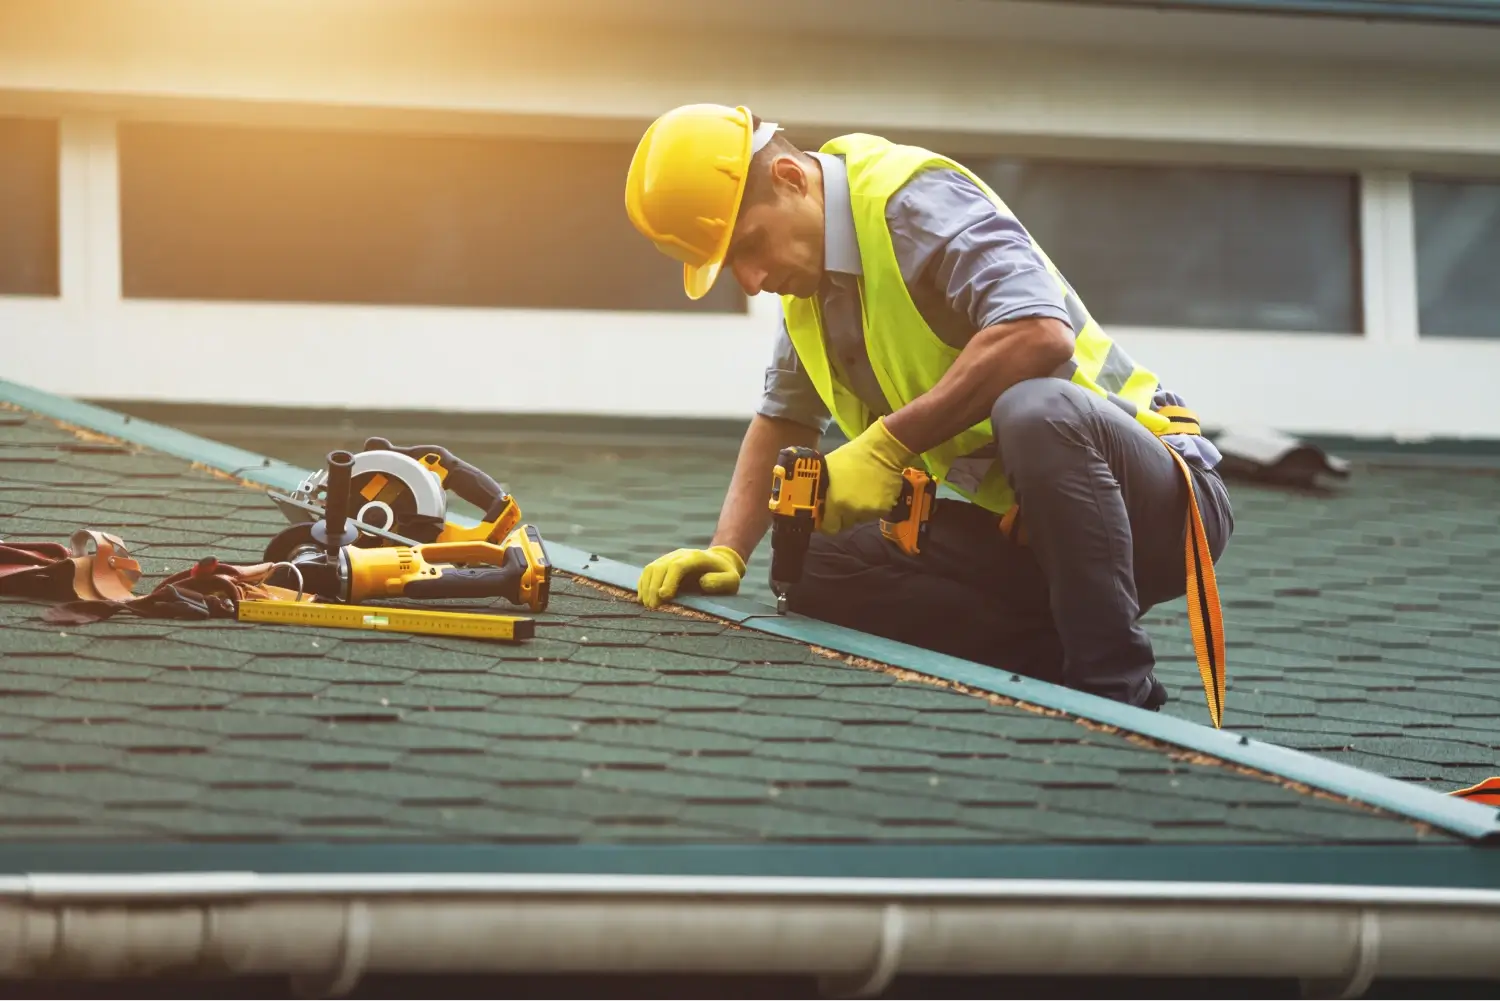 A man in a hard hat works to roof a house. Repairing or replacing an old roof can be vitual to the upkeep of your home.